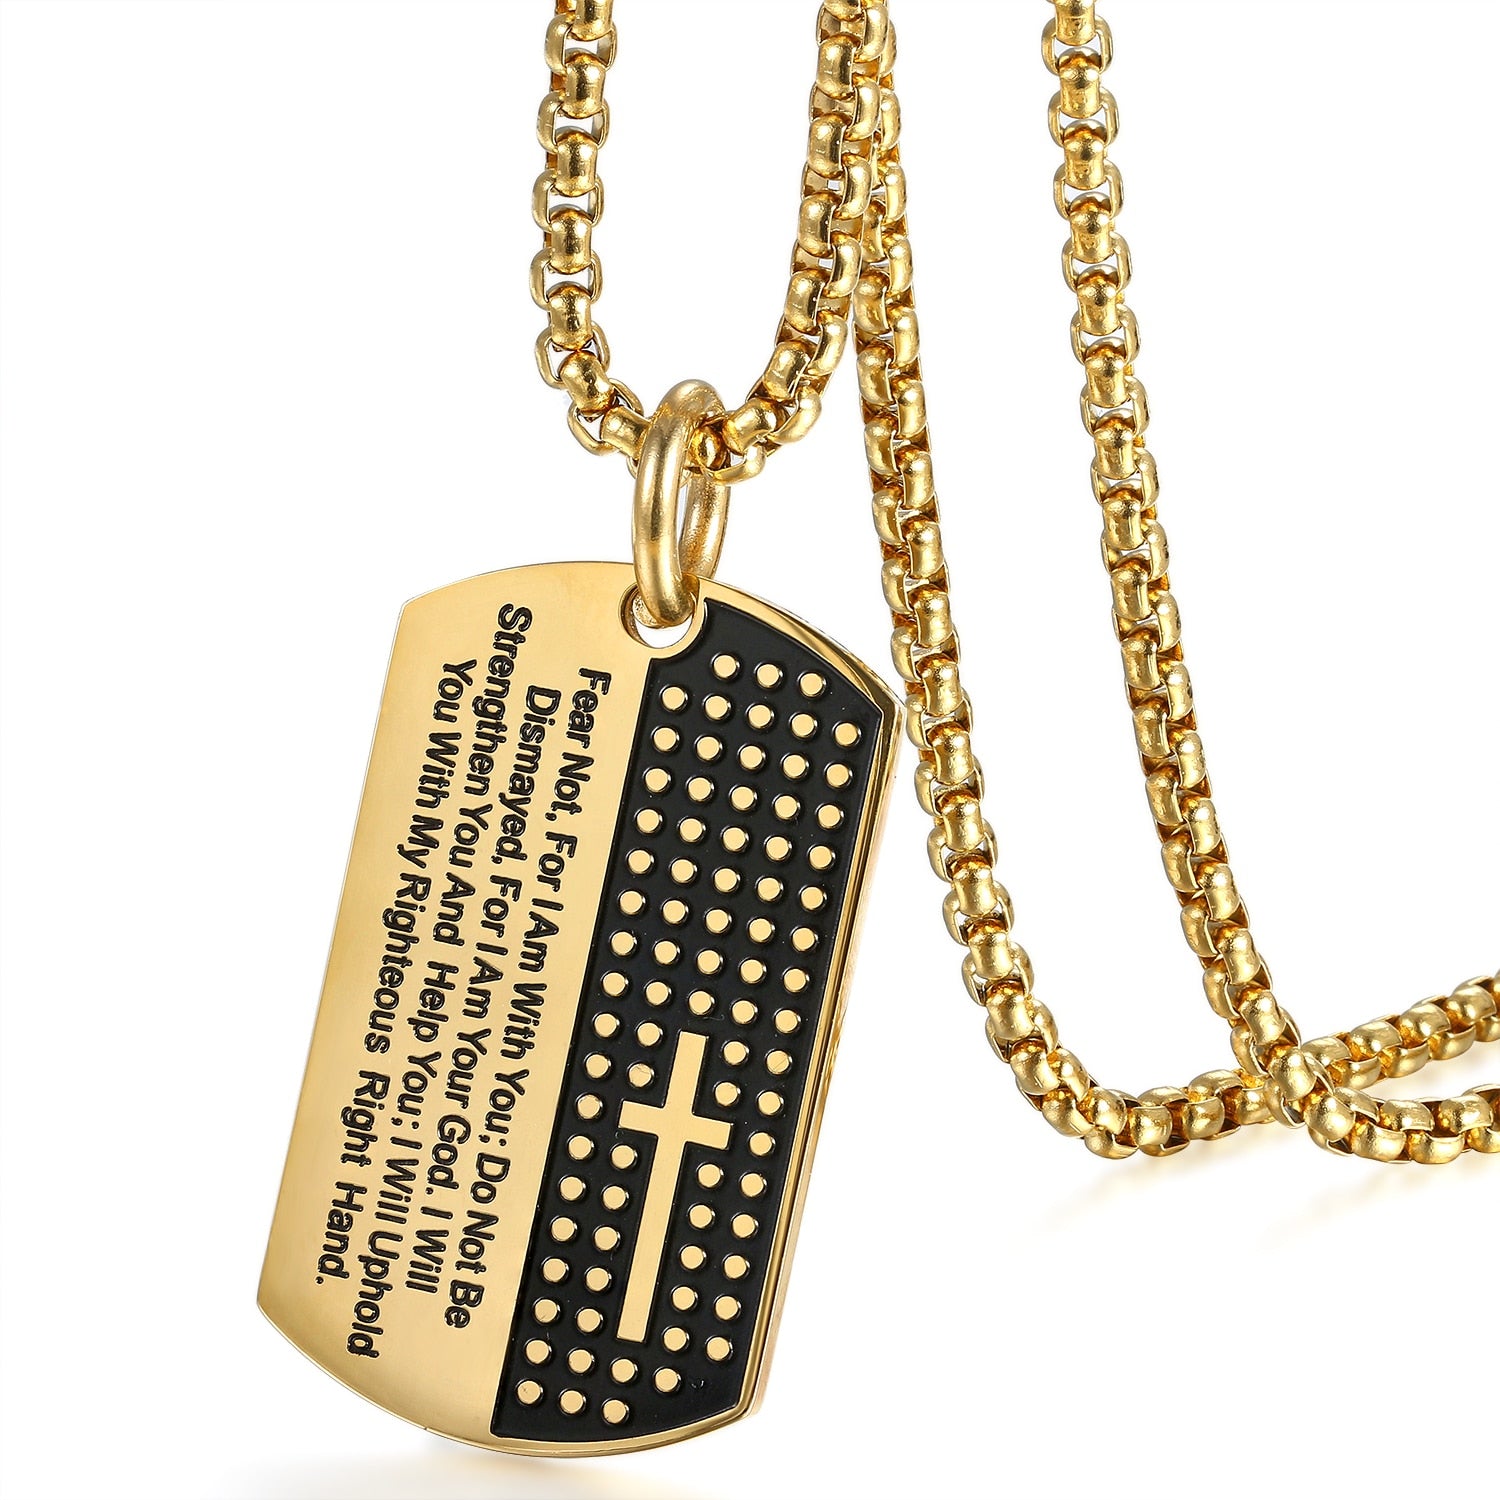 Gold Cross Dog Tag Pendant Chain Necklace